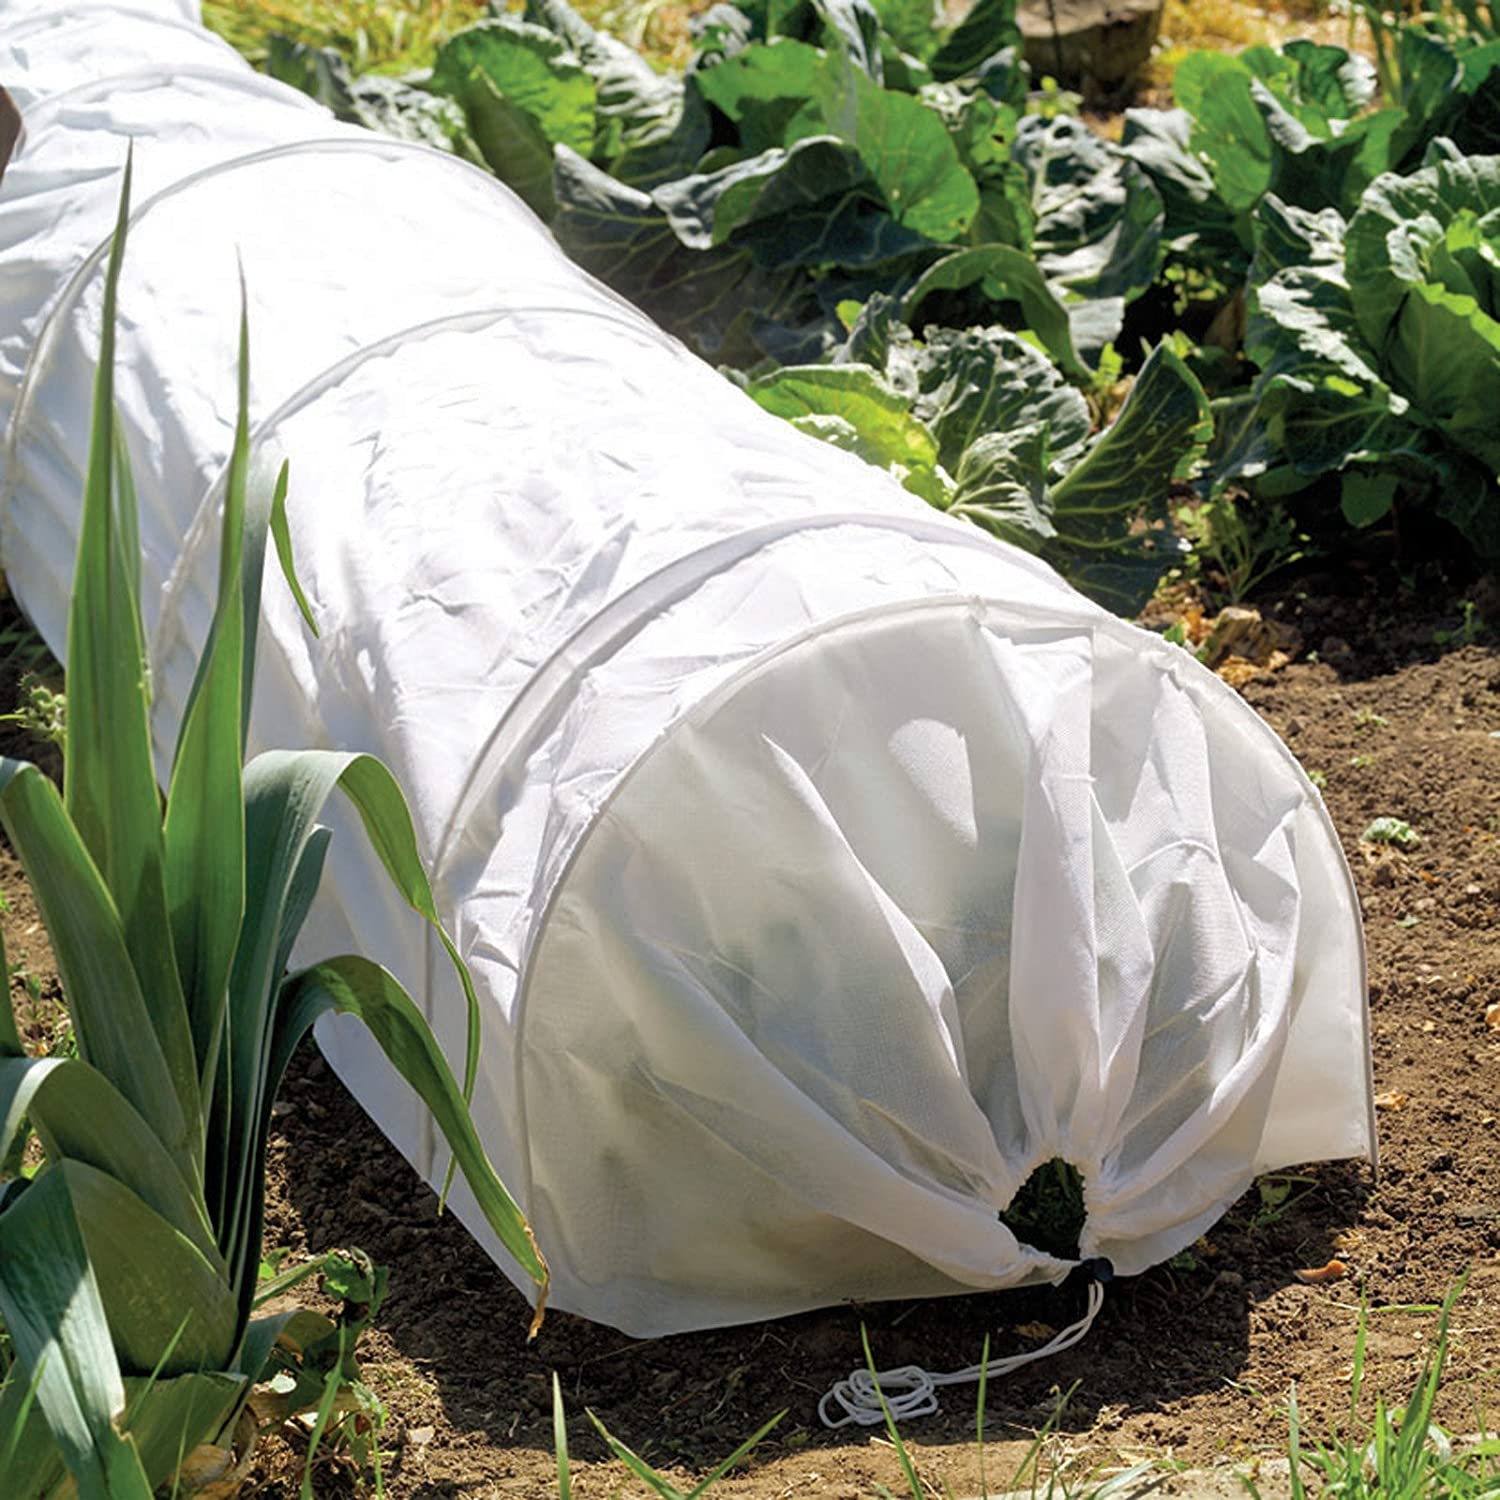 Grow It Fleece Tunnel with PVC Cover, White | 08771